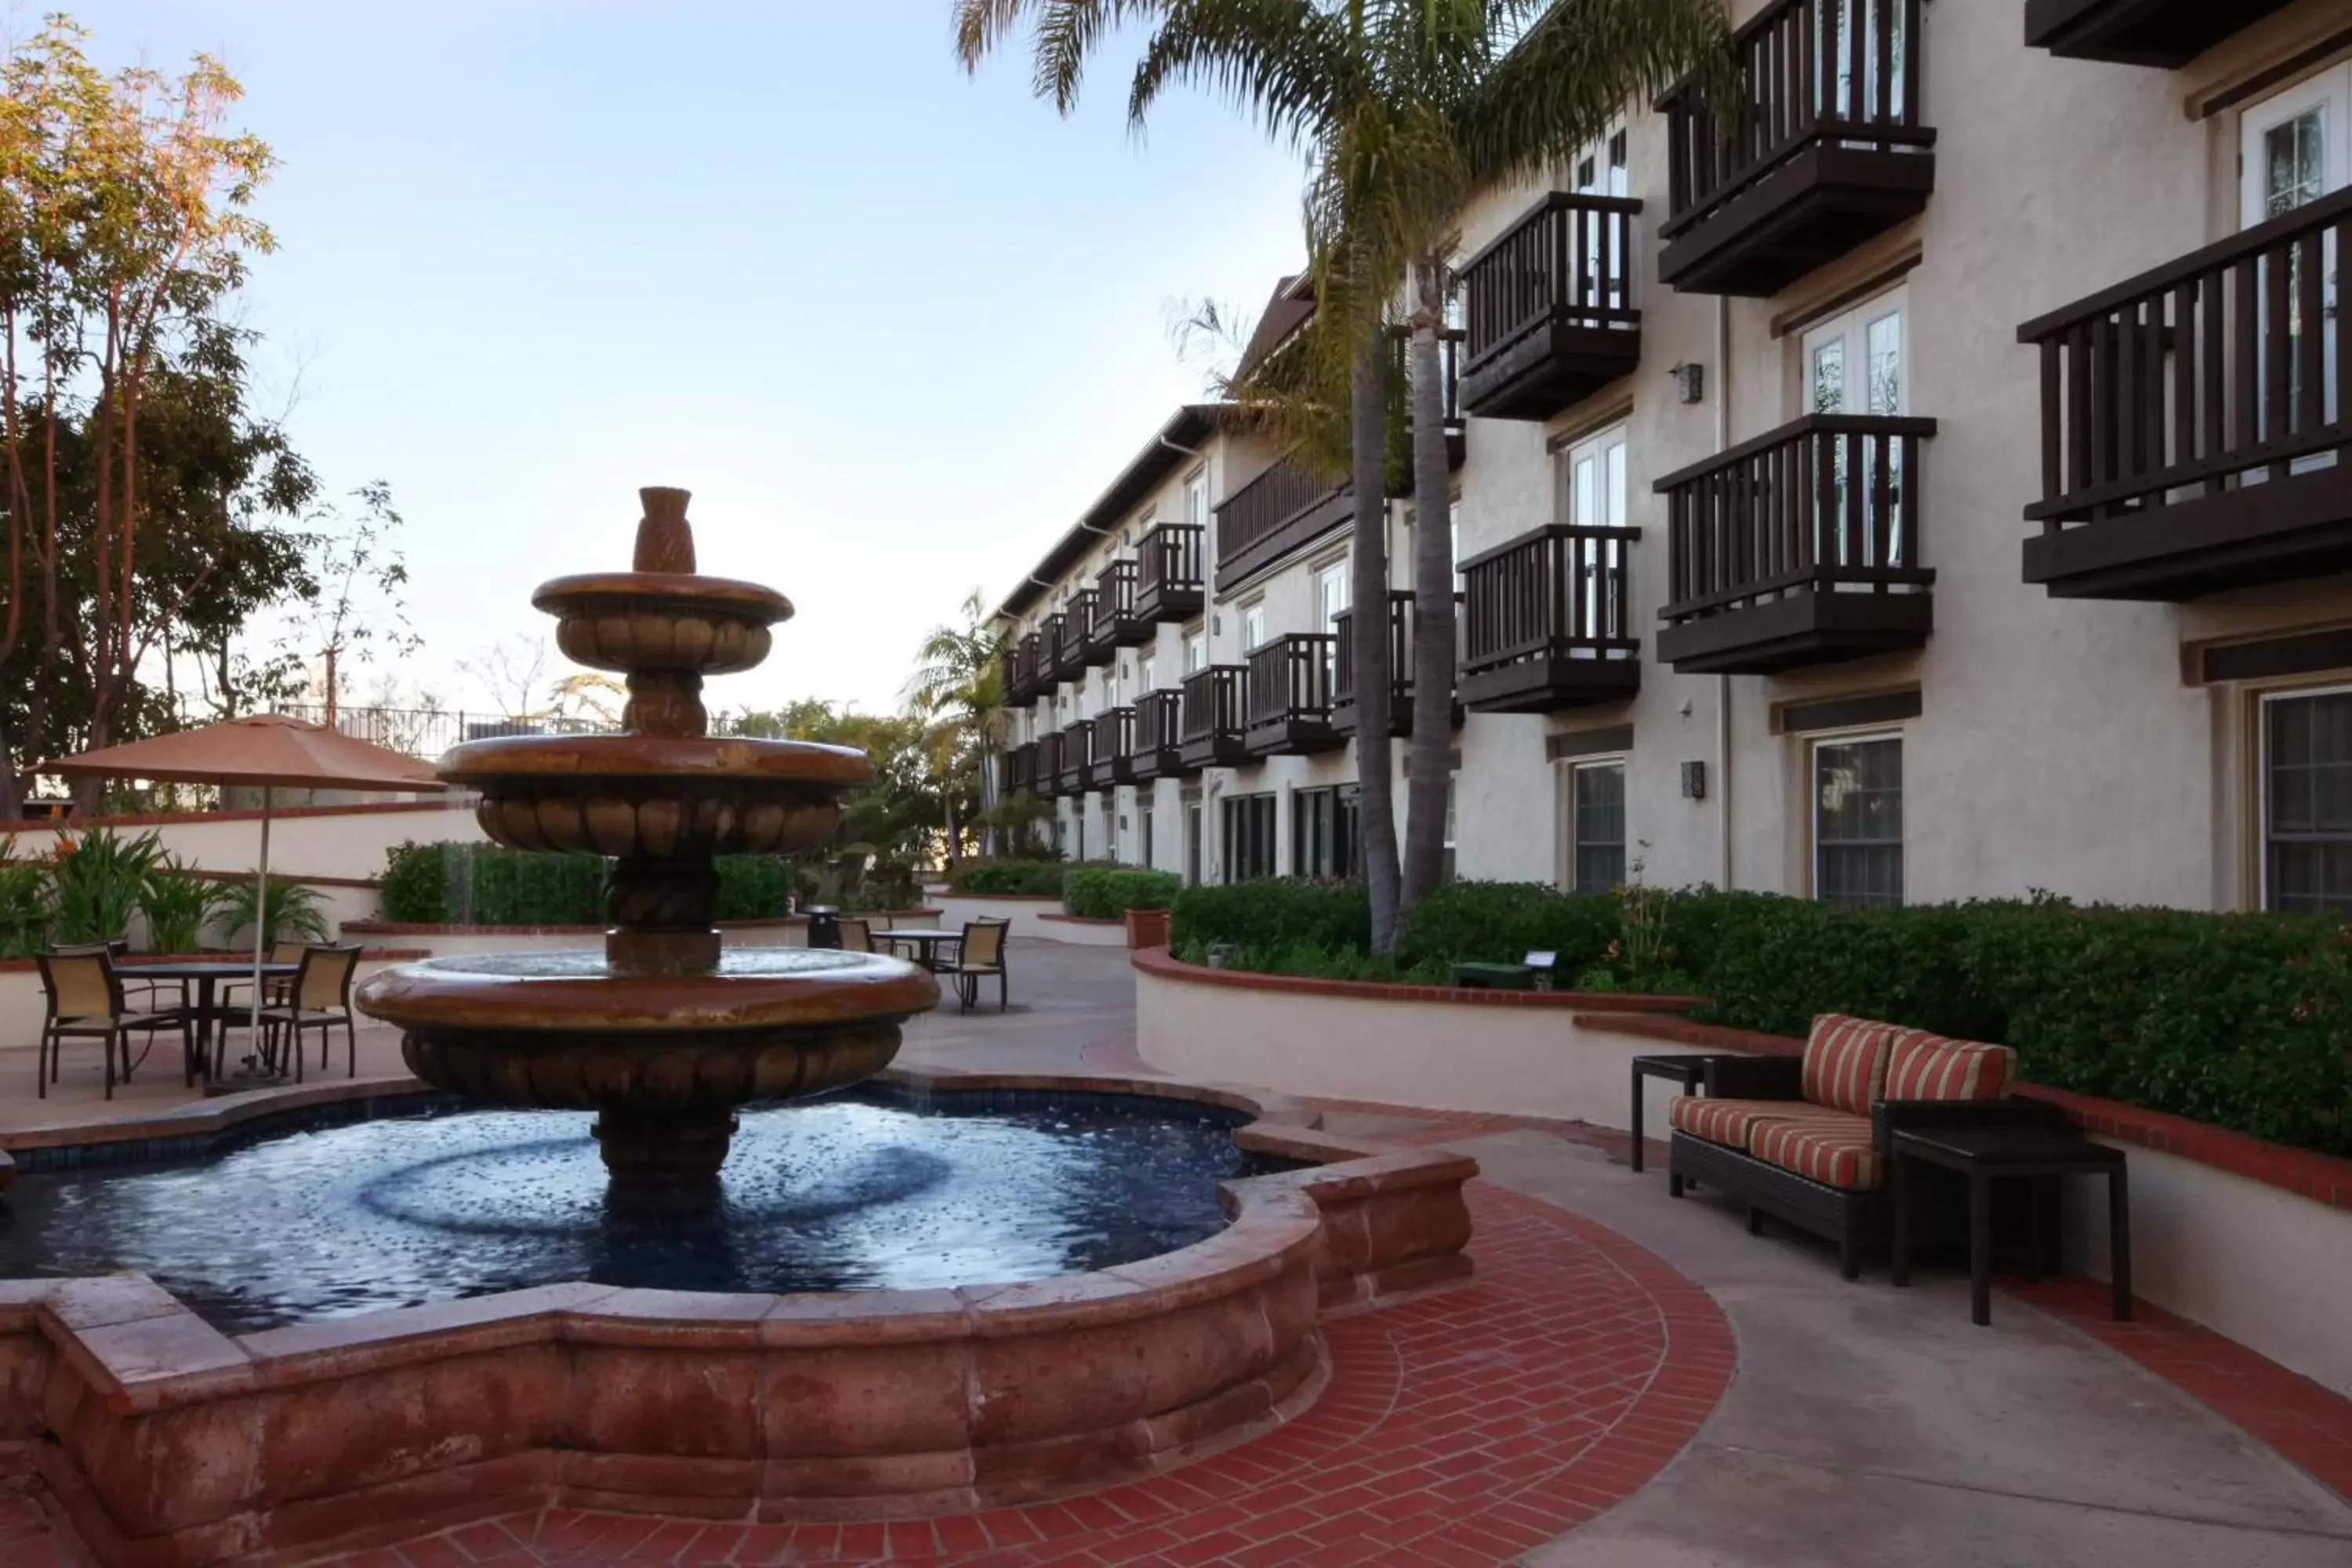 Property building in Fairfield Inn & Suites San Diego Old Town